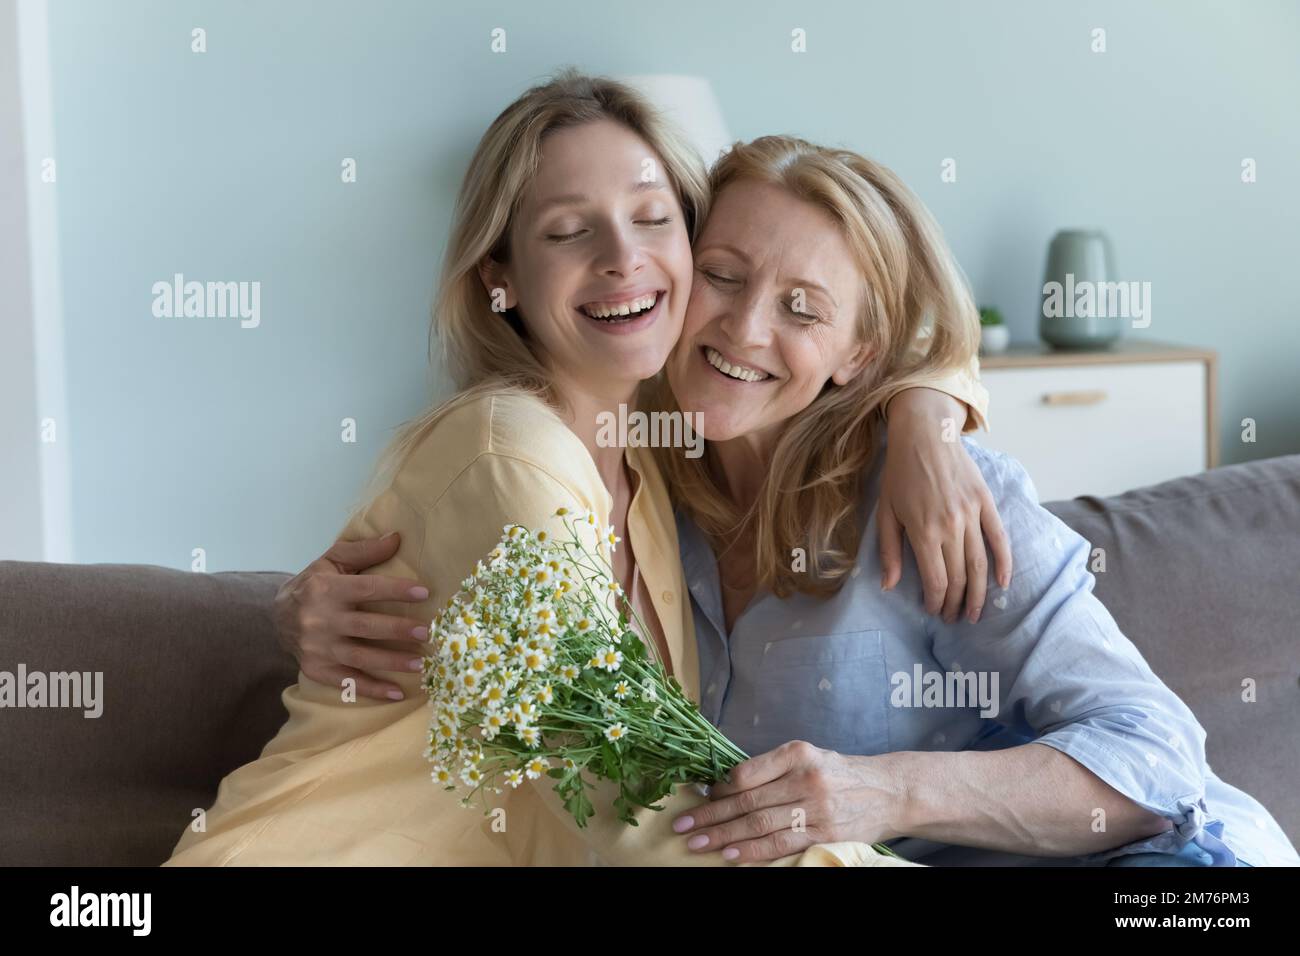 Happy peaceful young adult daughter girl giving flowers to mom, Stock Photo